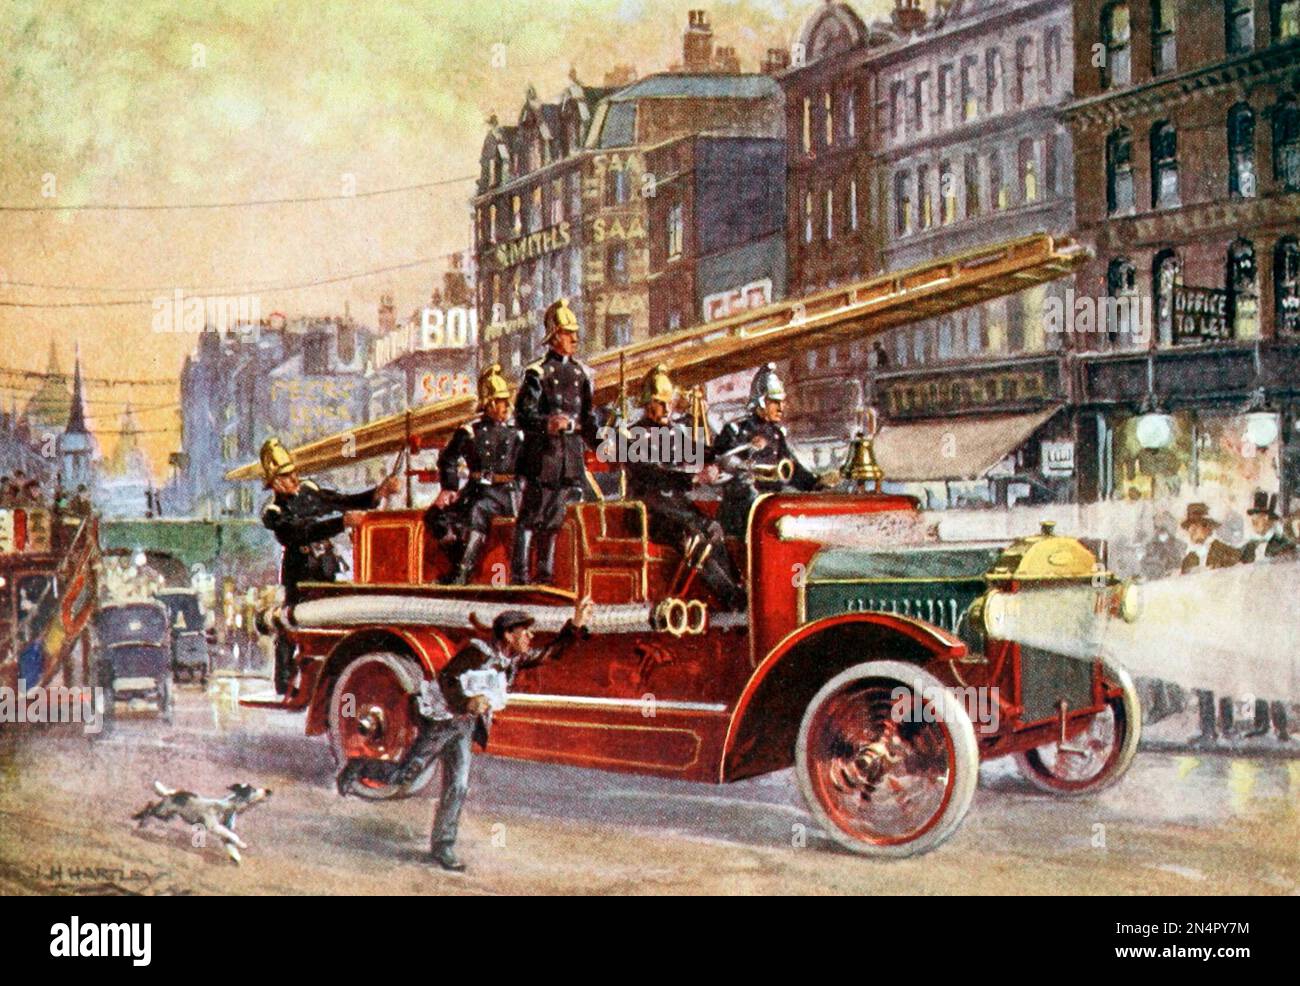 Le Fire Engine to the Rescue, Londres, Angleterre, vers 1900 Banque D'Images